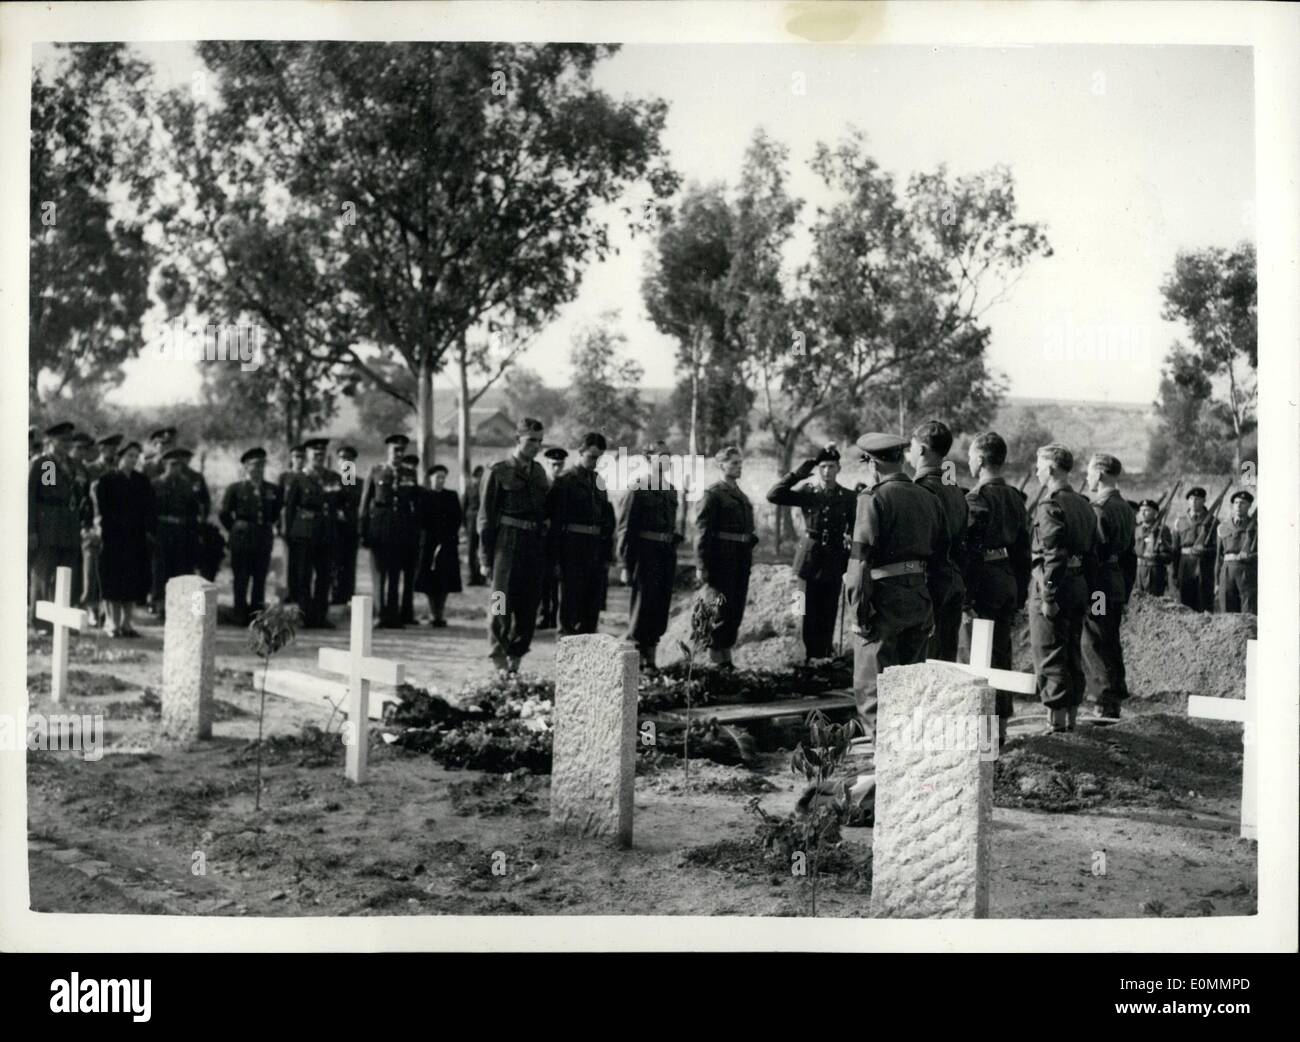 Dec. 12, 1955 - Gallant British Officer buried in Nicosia.. He hurled back terrorists' bombs: During the night of December 17th. Liwut. L.T.I. Kelly of the Royal Artillery was guarding the Yialousa Police station with a small unit of troops when they were attacked by armed and masked terrorists. Heavy firing took place on both sides and bombs were thrown by the attackers.. Lieut. Kelly picked up one grenade and threw it back - he then stopped and picked up another which he hurled back - but a terrorist opened fire and killed him. Lieut. Kelly is the son of Brigadier T.E.D. Kelly, C.B.E Stock Photo